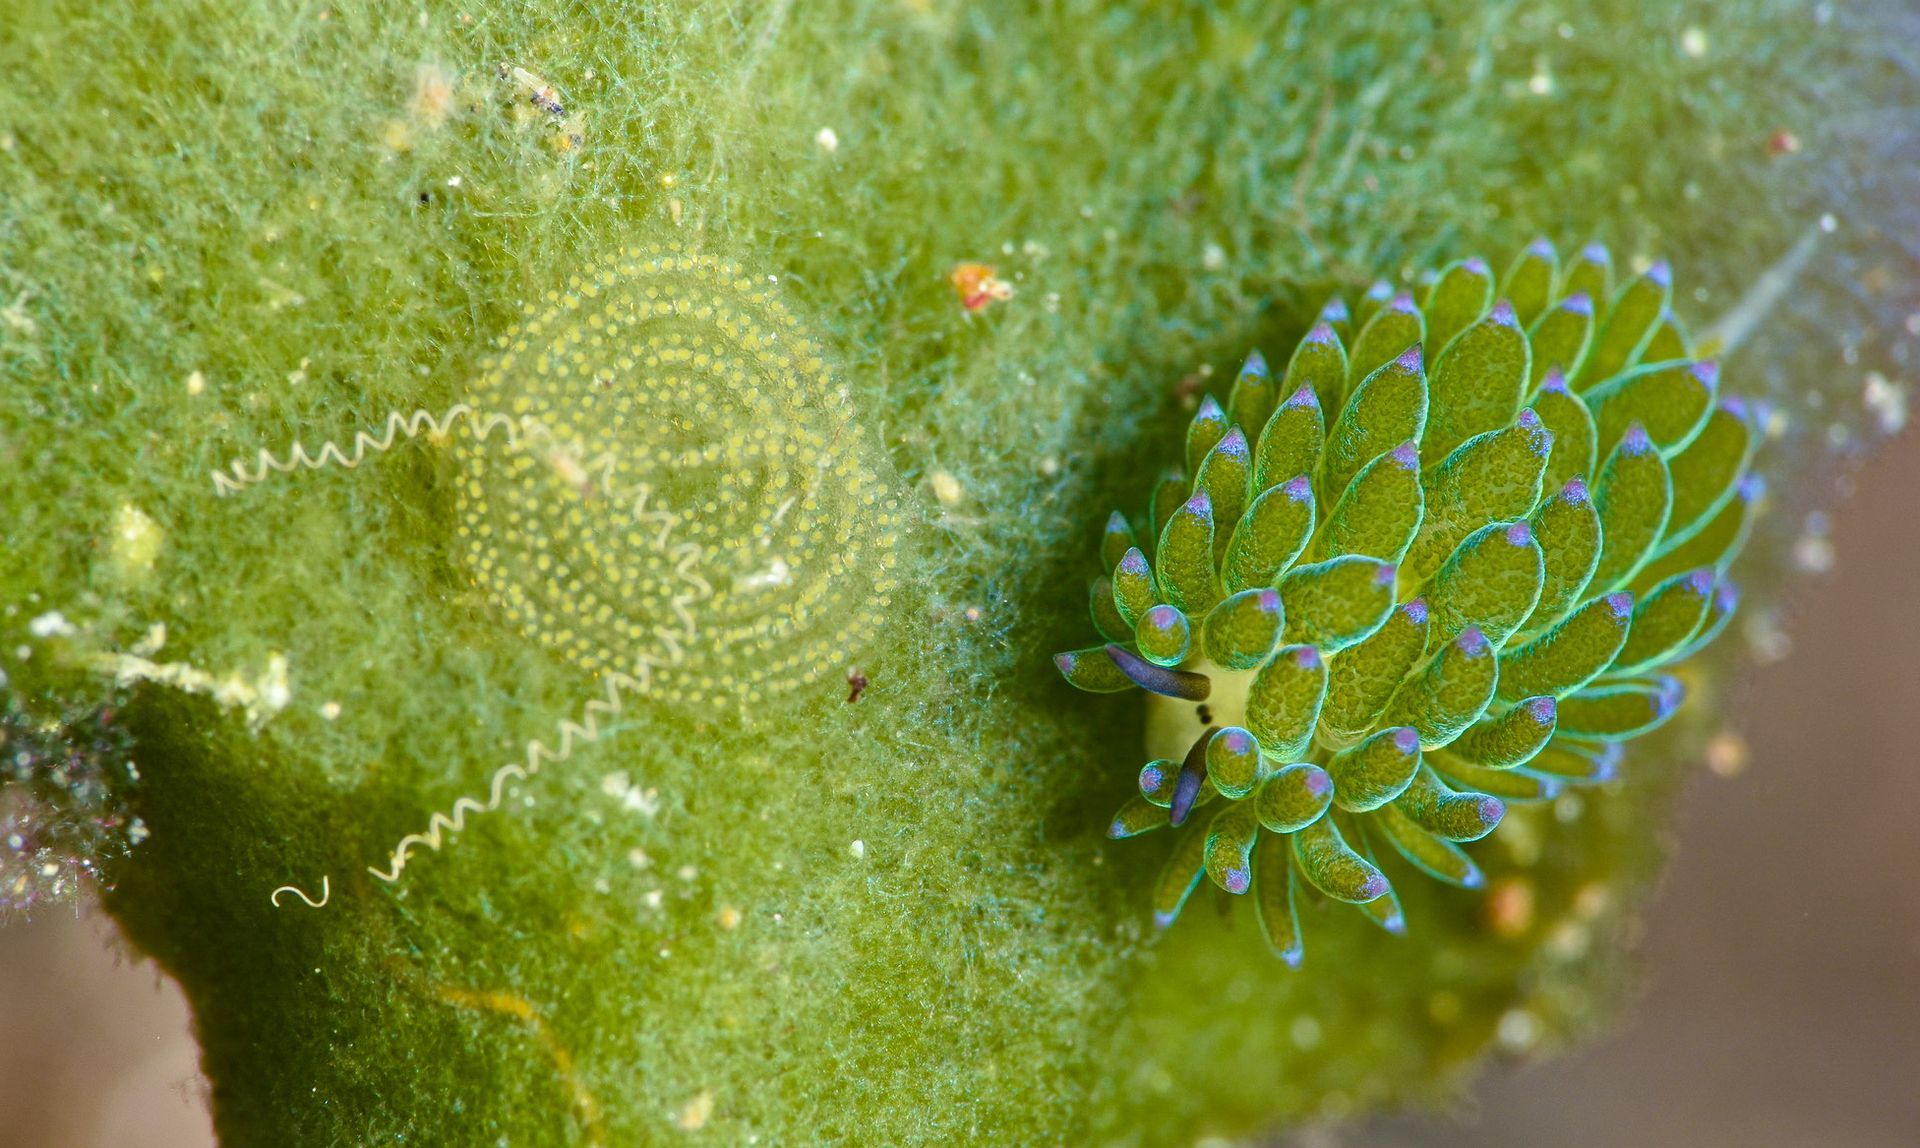 A green nudibranch with purple tips on a piece of sea weed next to a ring of white eggs , taken on a Fiji underwater photography workshop